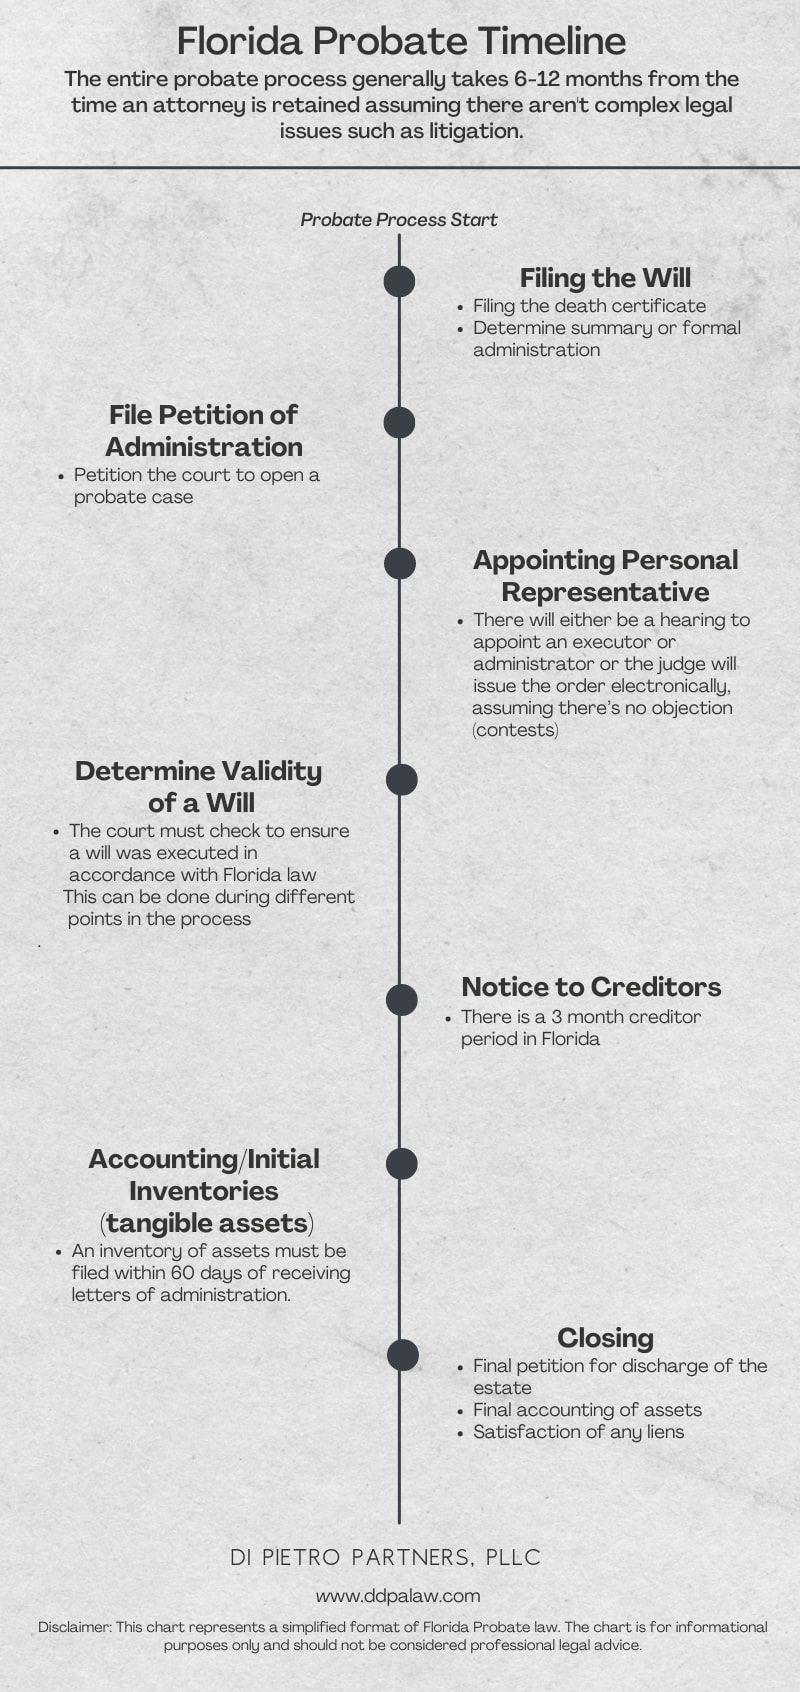 Infographic chart showing Florida probate rules and timeline starting with filing the will all the way down to closing the estate. The entire process takes between 6-12 months.